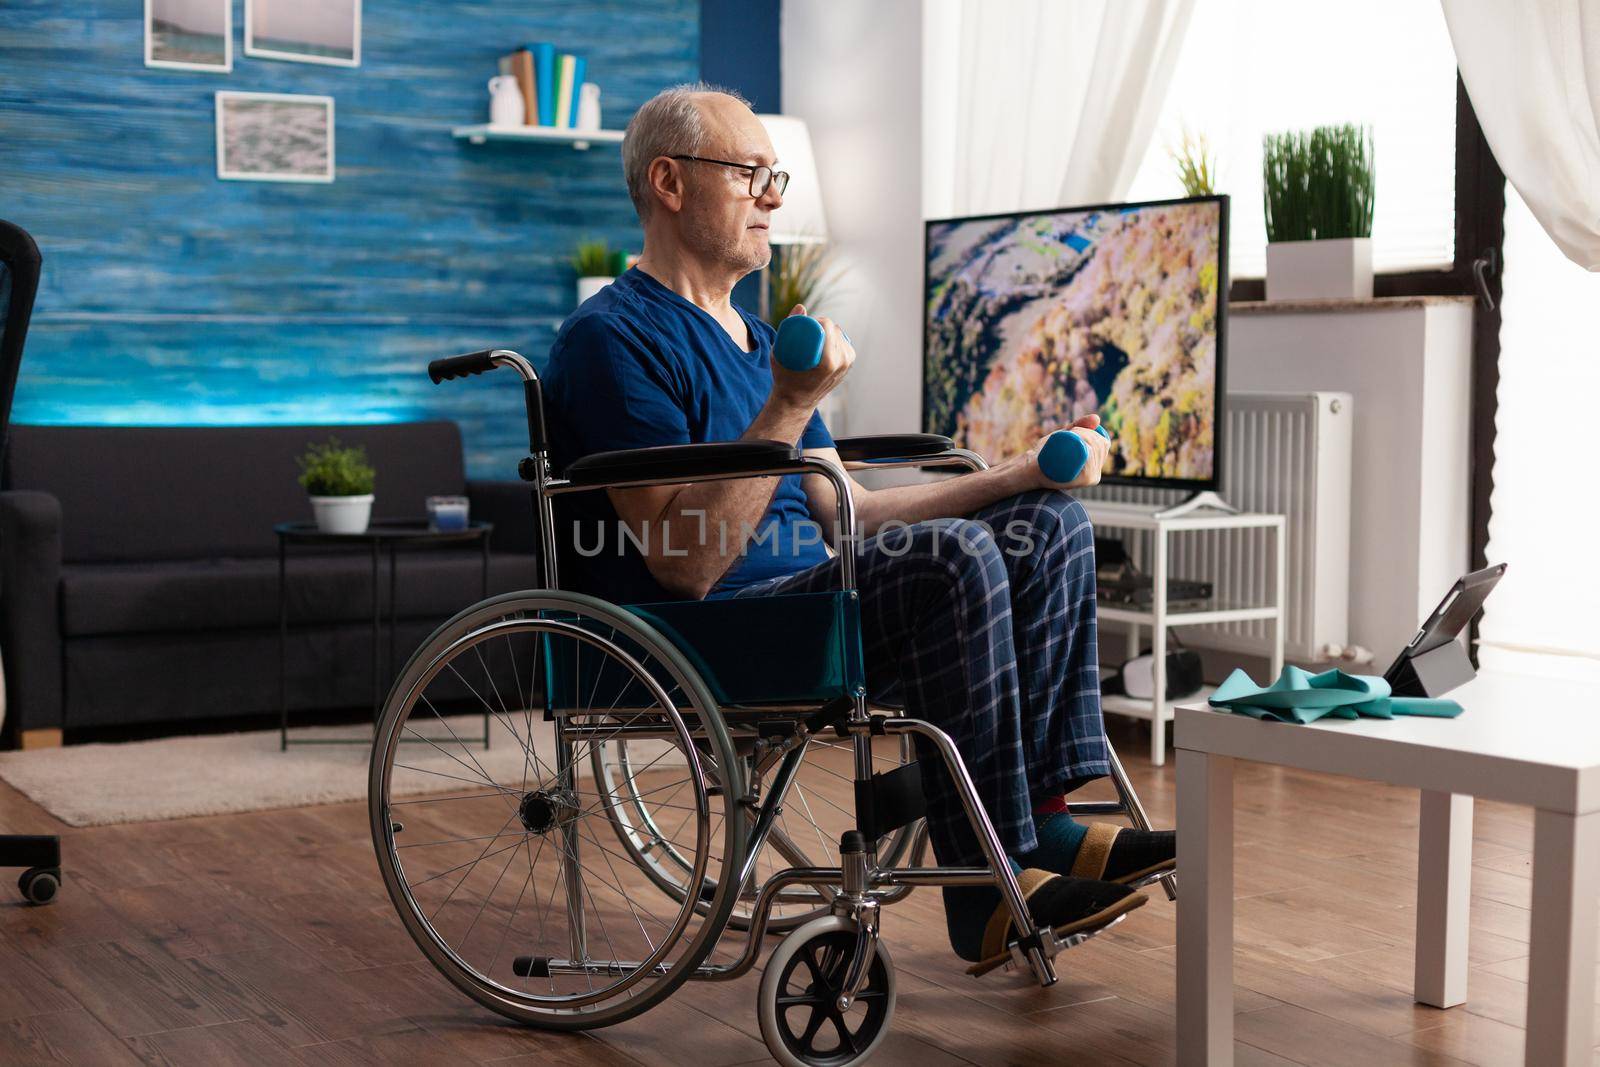 Focused senior man in wheelchair watching online workout video on tablet computer in living room working arm muscle using dumbbells. Invalid pensioner recovering body resistance after paralysis